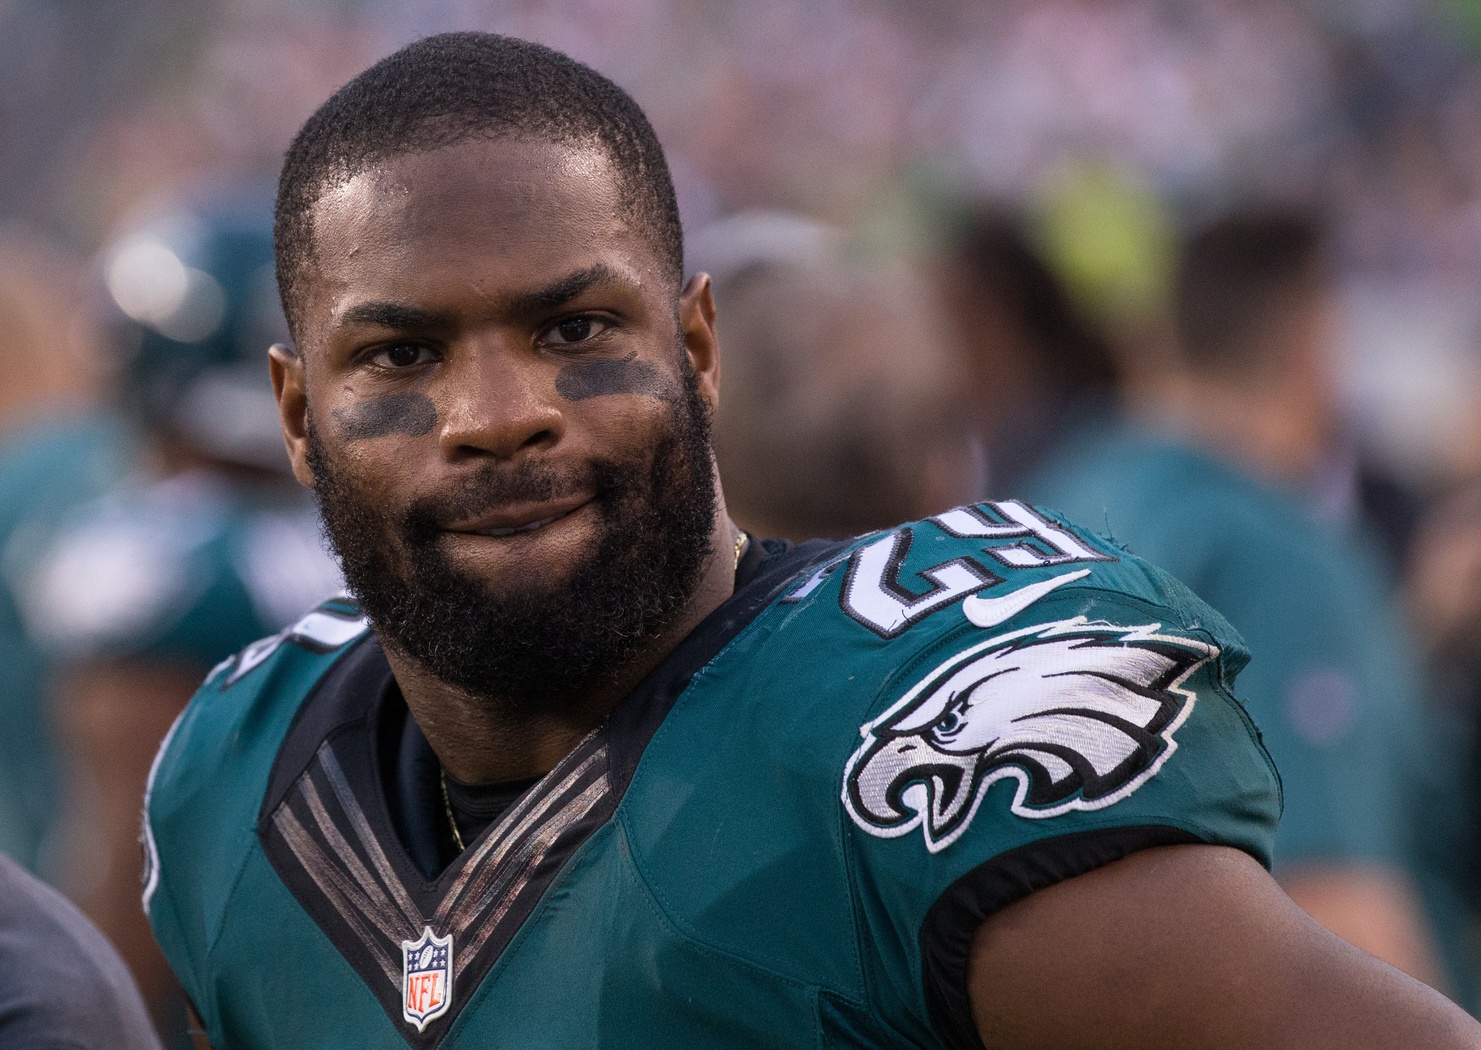 DeMarco Murray is Definitely not Mad about his Lack of Snaps, No Siree